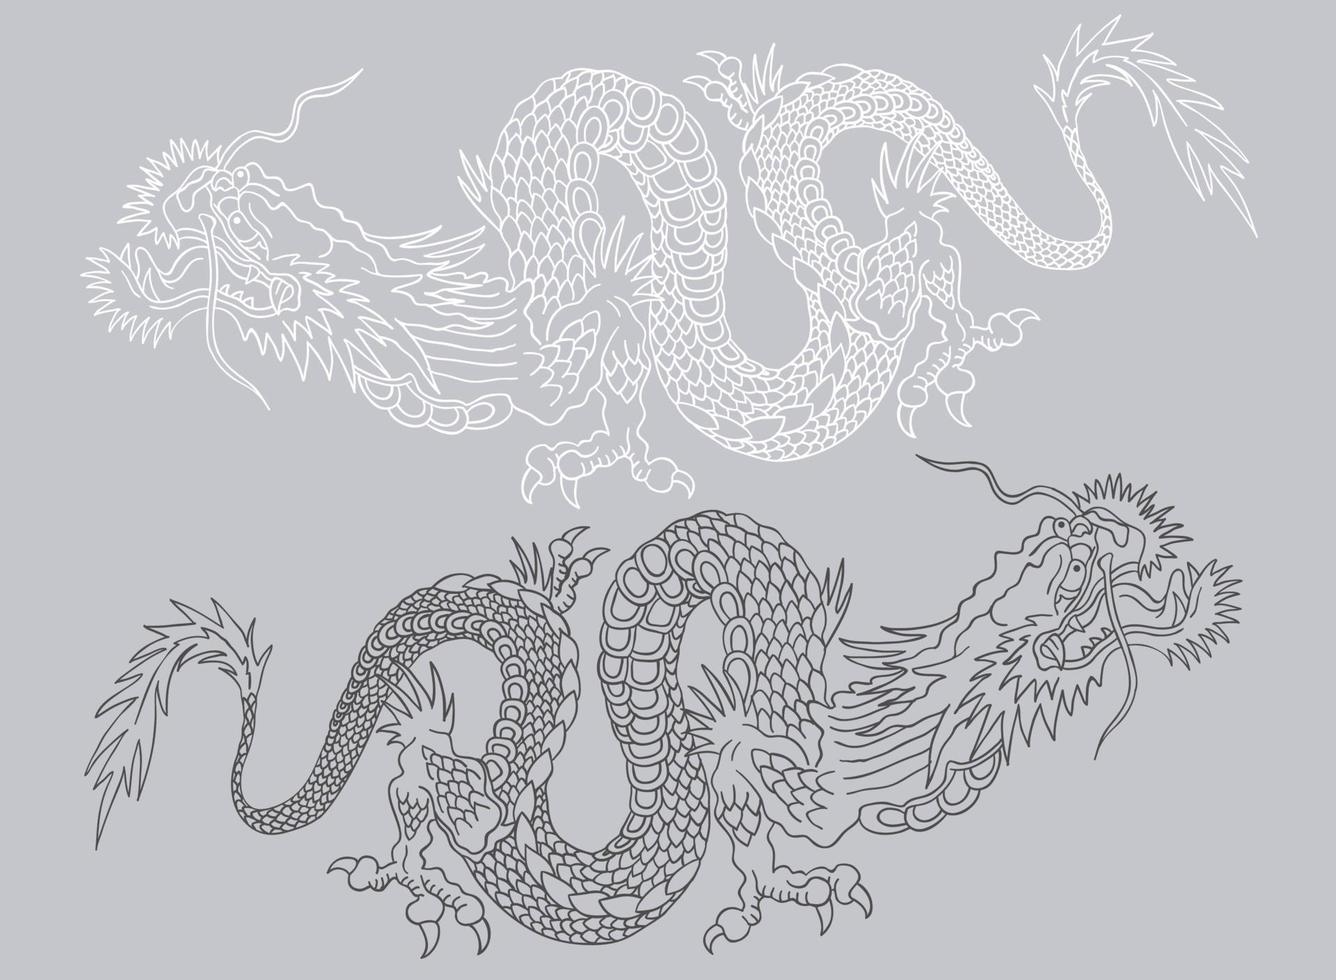 Black and white asian dragons. vector